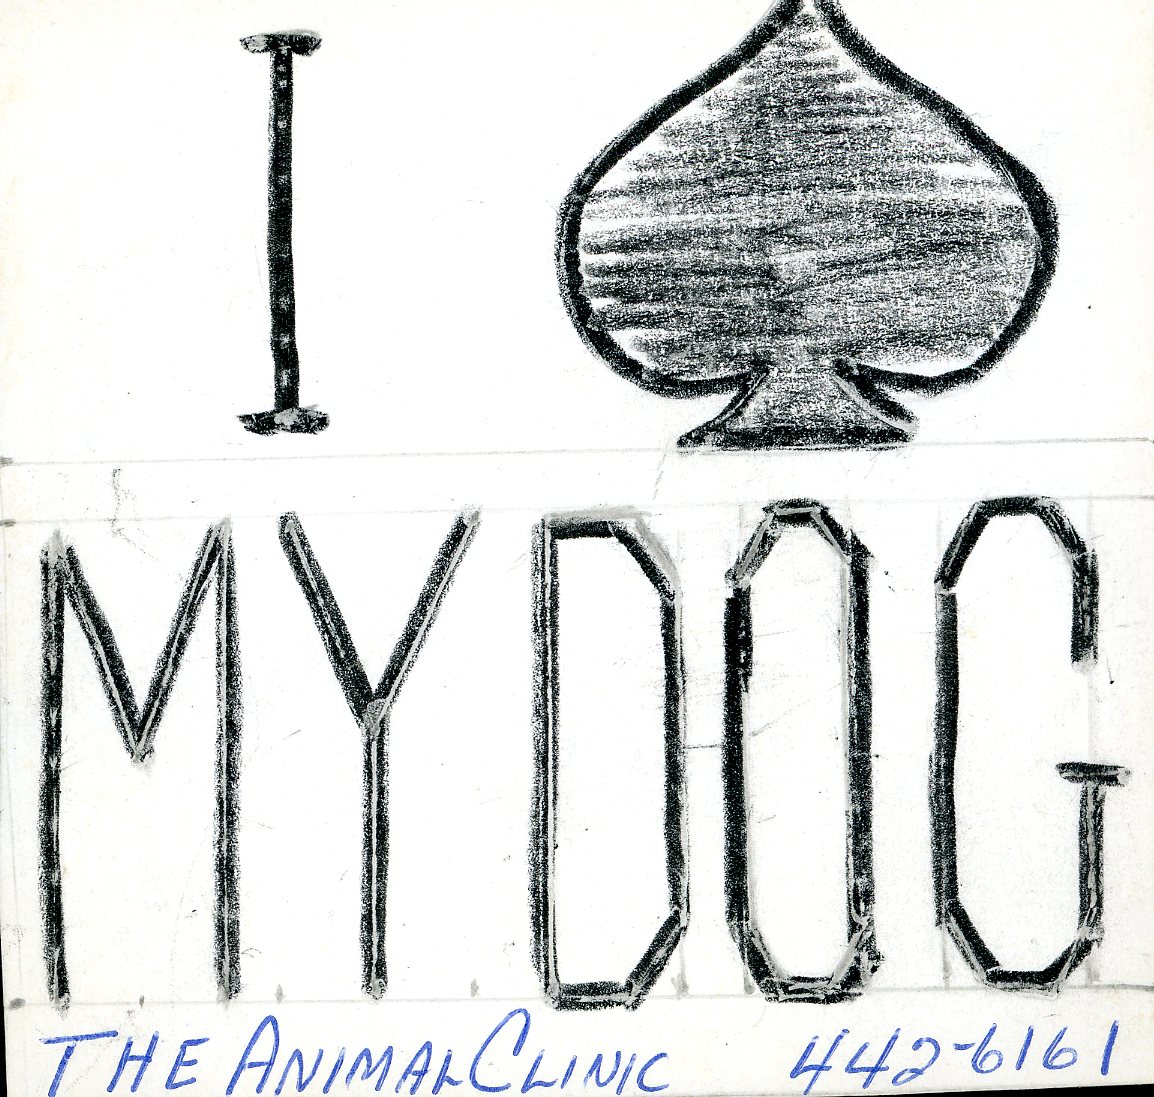 Lieberman’s prototype for “I (Spayed) My Dog” bumper sticker to advertise clinic services (Box 21, Folder 4).